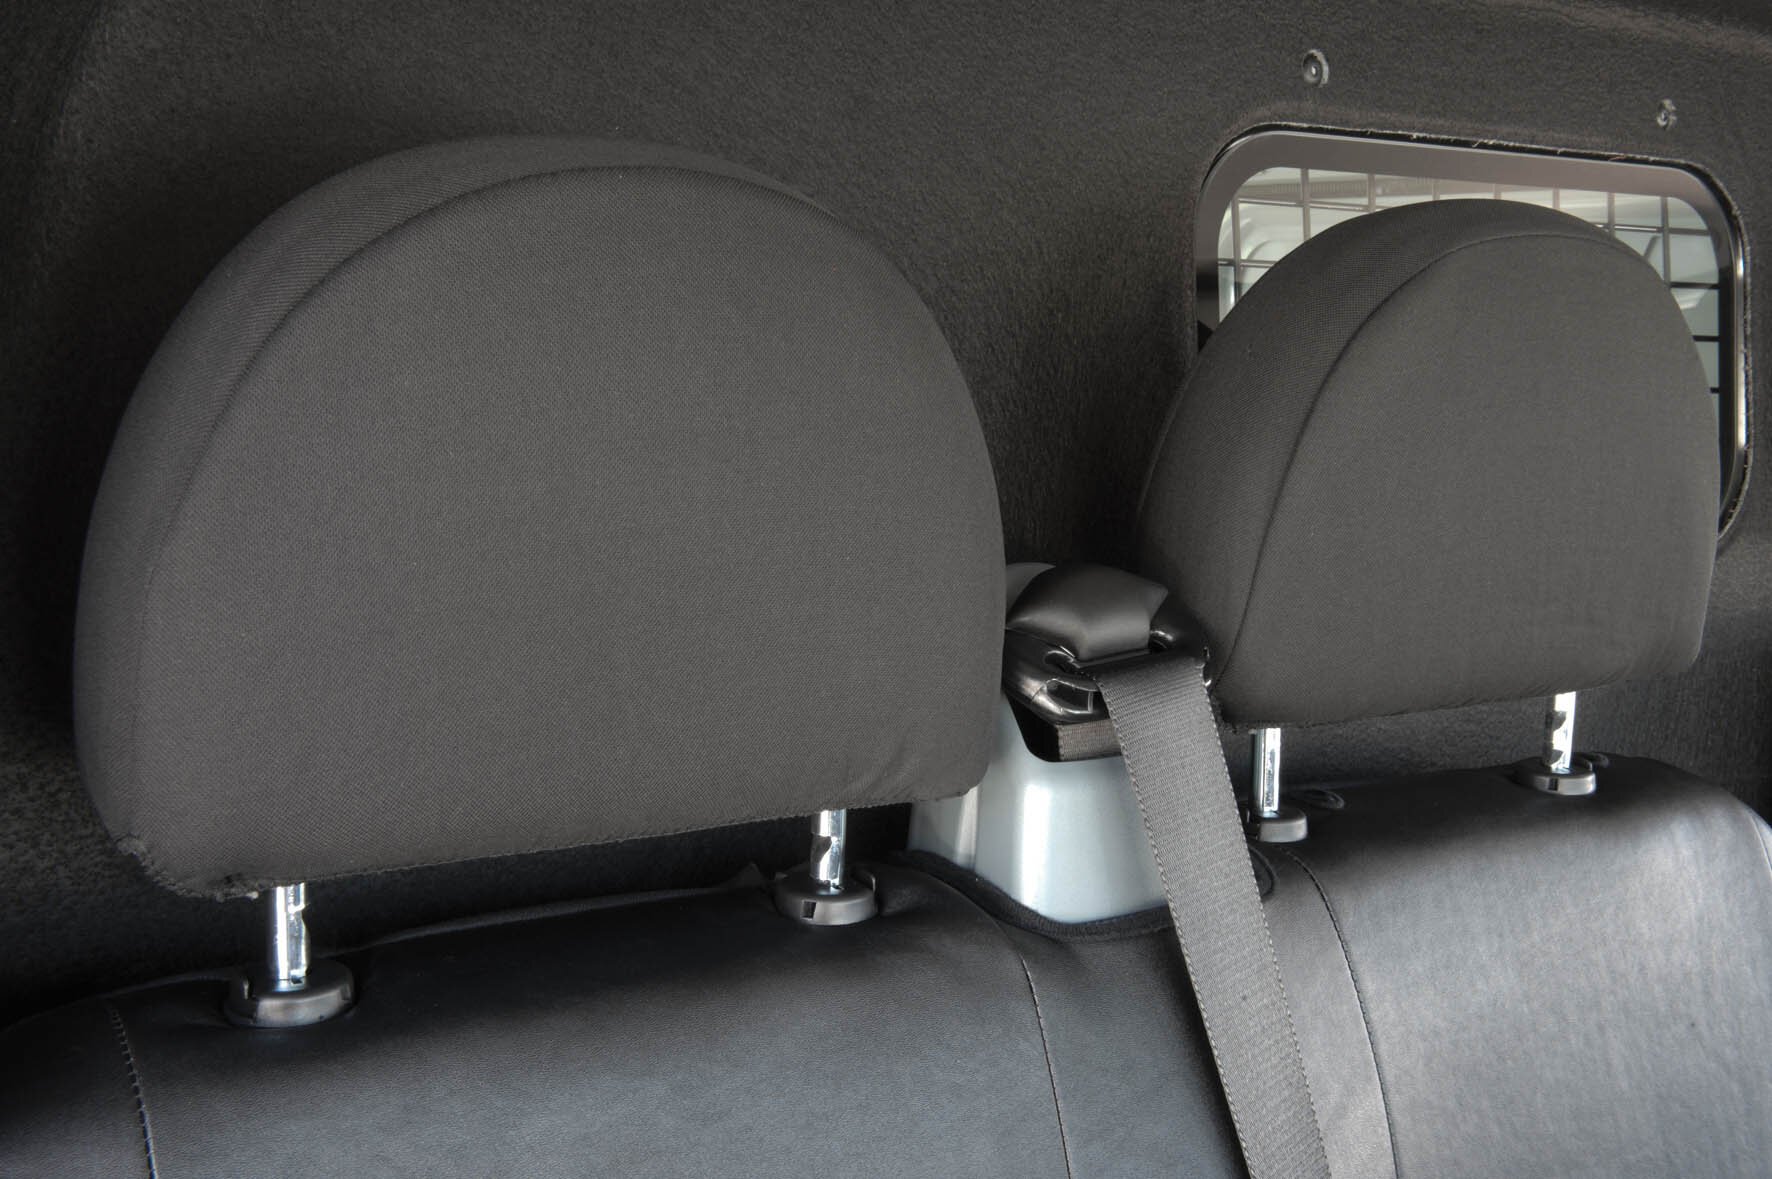 Car Seat cover Transporter made of imitation leather for Ford Transit, single & double bench seat